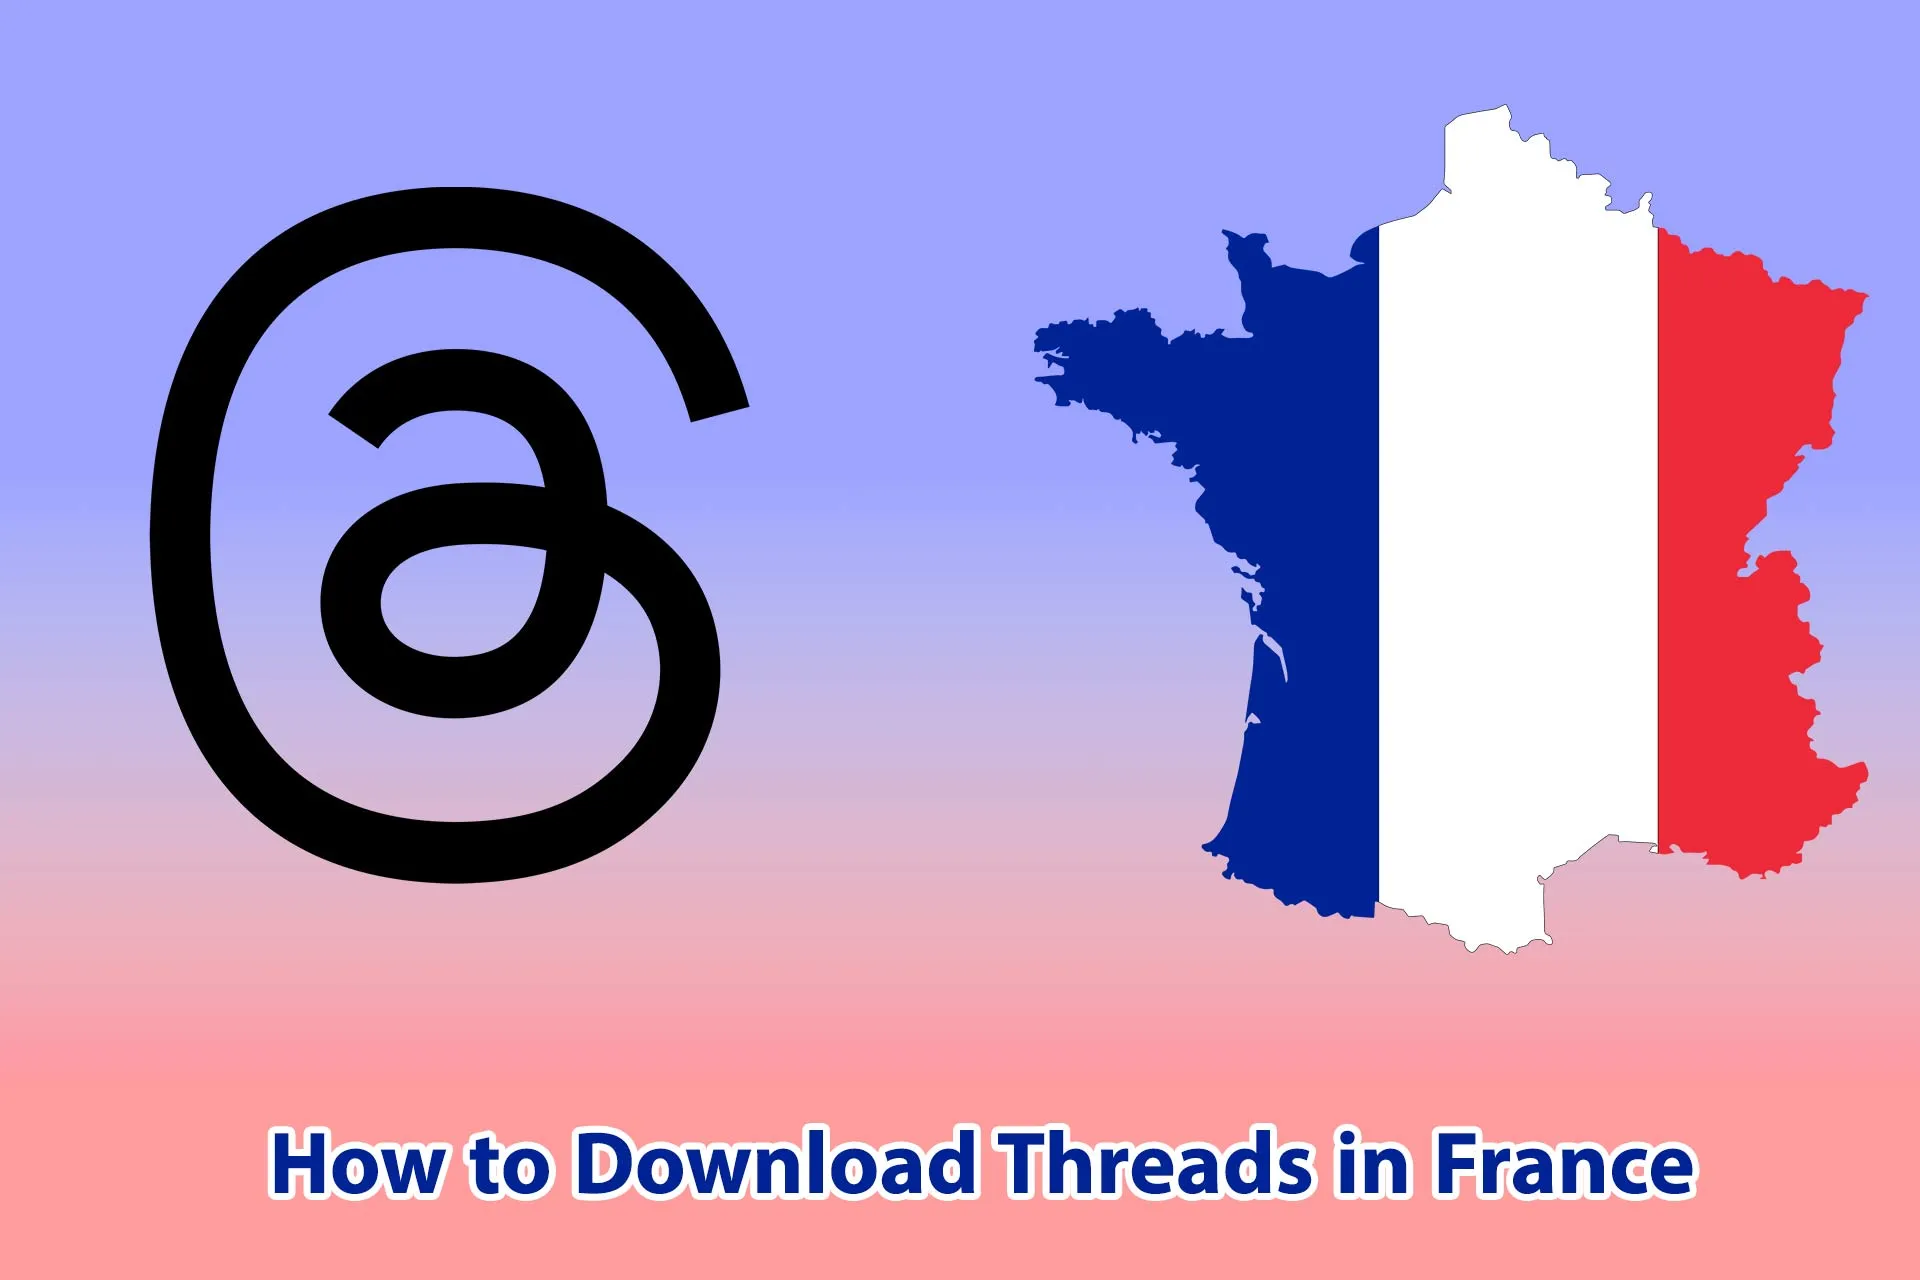 How to Download Threads in France